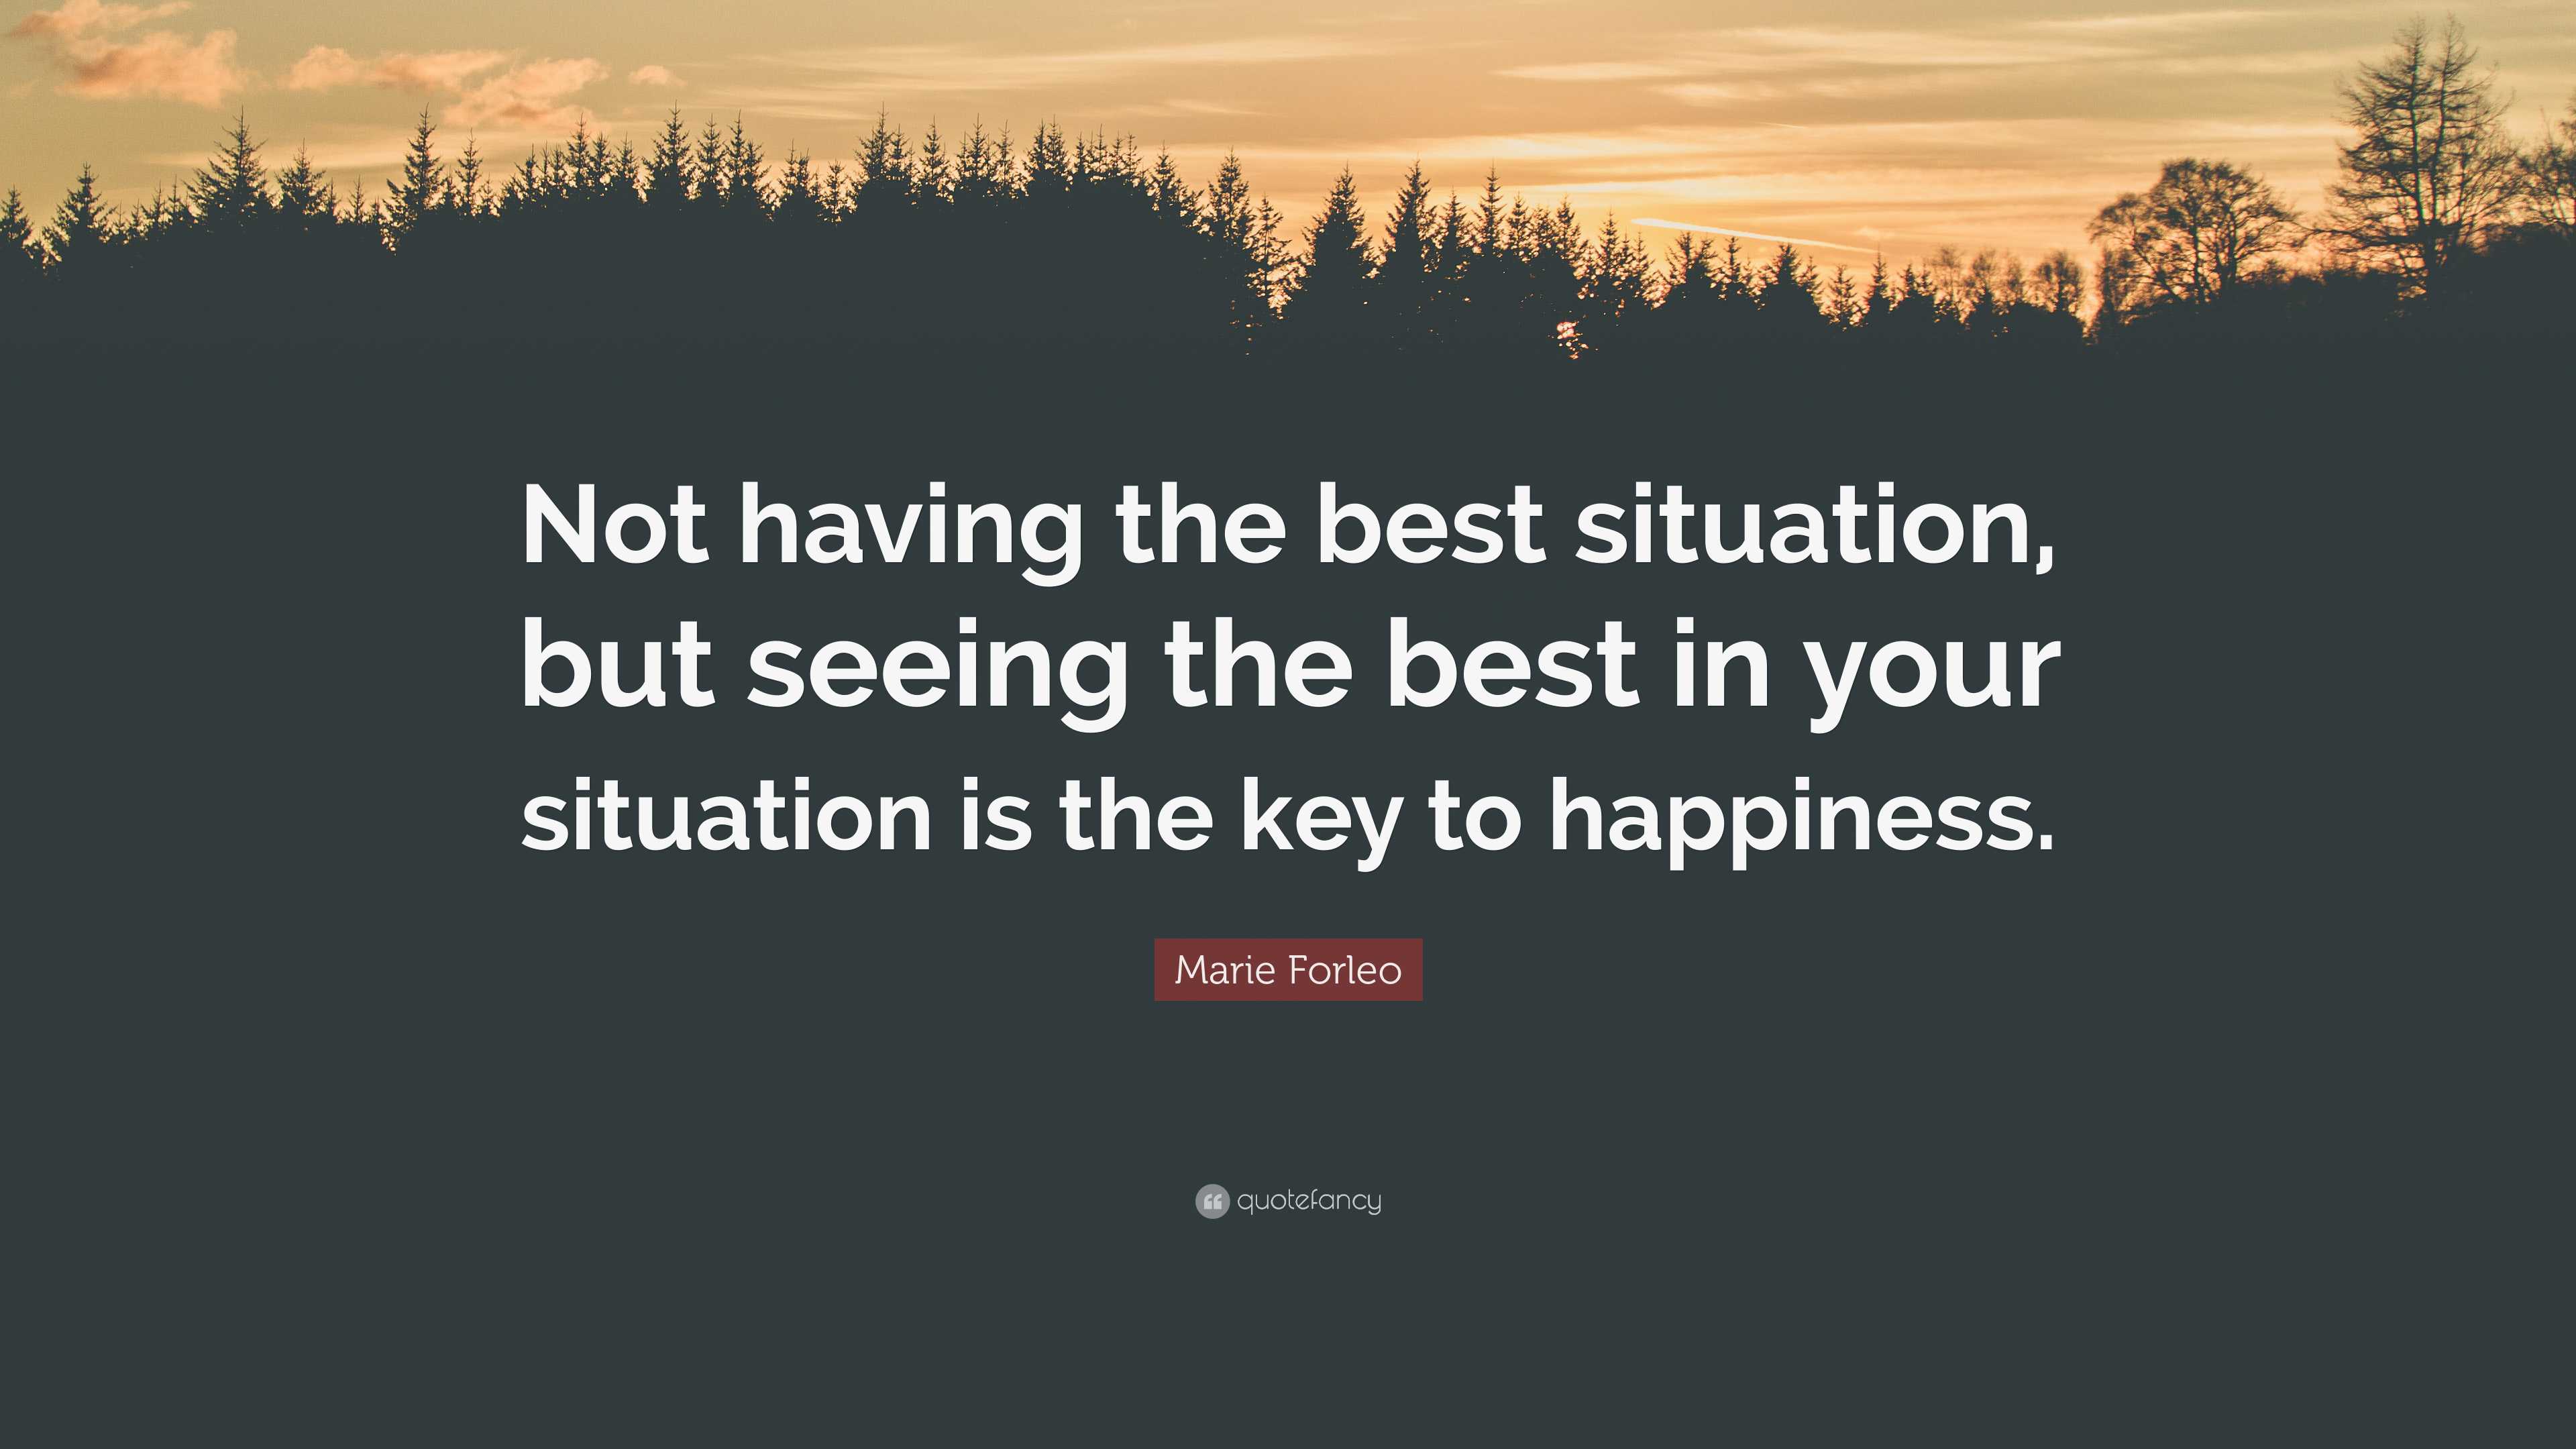 Marie Forleo Quote: “Not having the best situation, but seeing the best ...